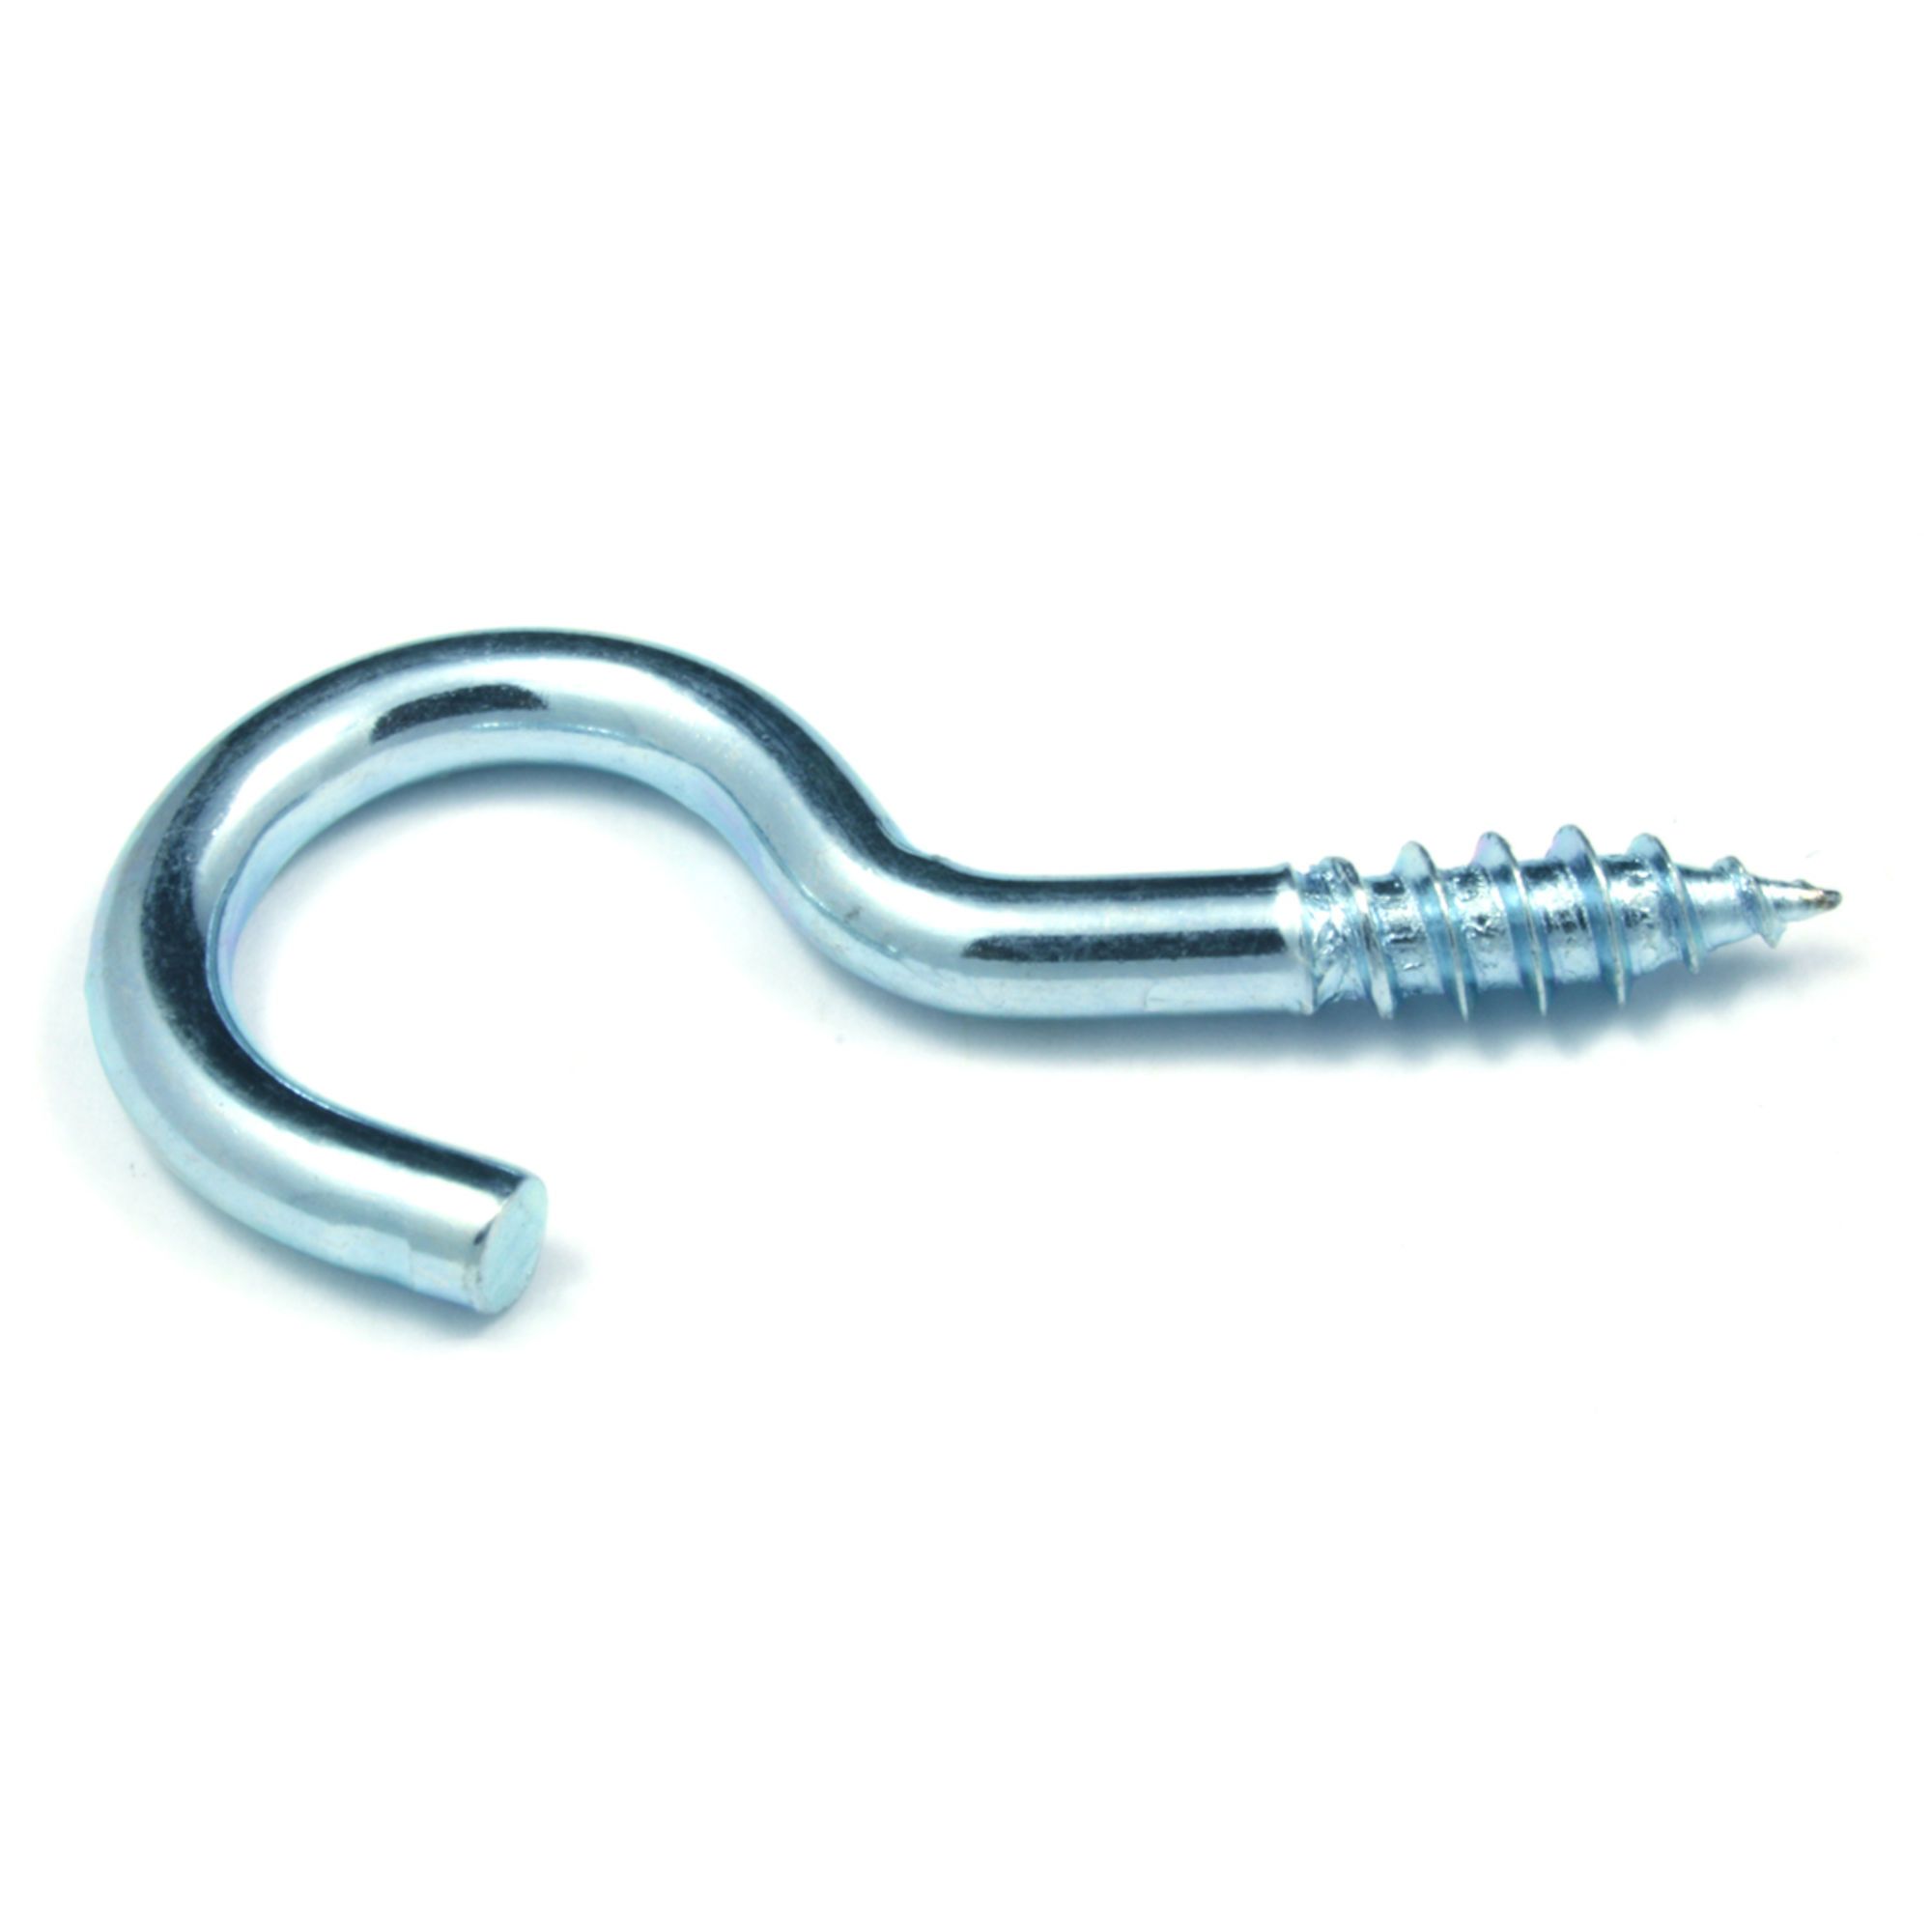 Screw hook - Zinc - 2 1/4 from RELIABLE FASTENERS